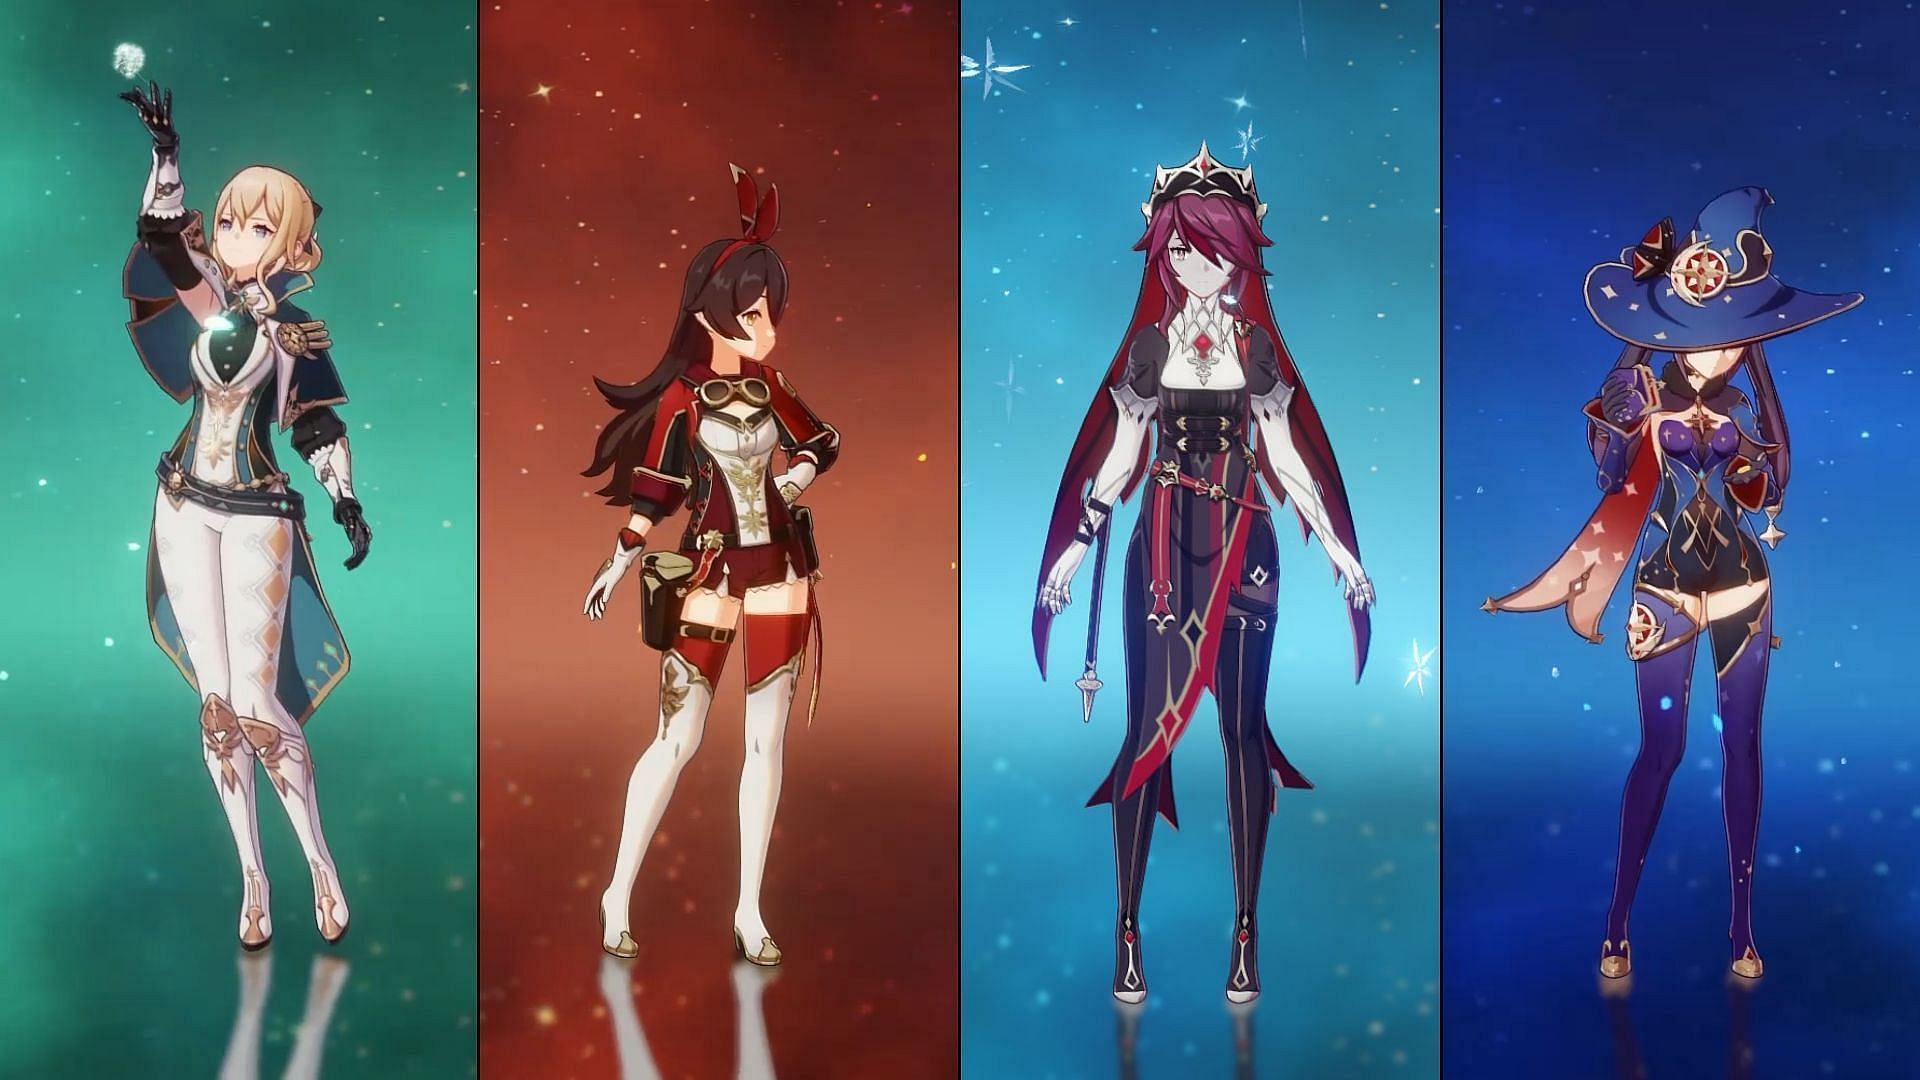 The four new Alternate Outfits in Genshin Impact (Image via miHoYo)